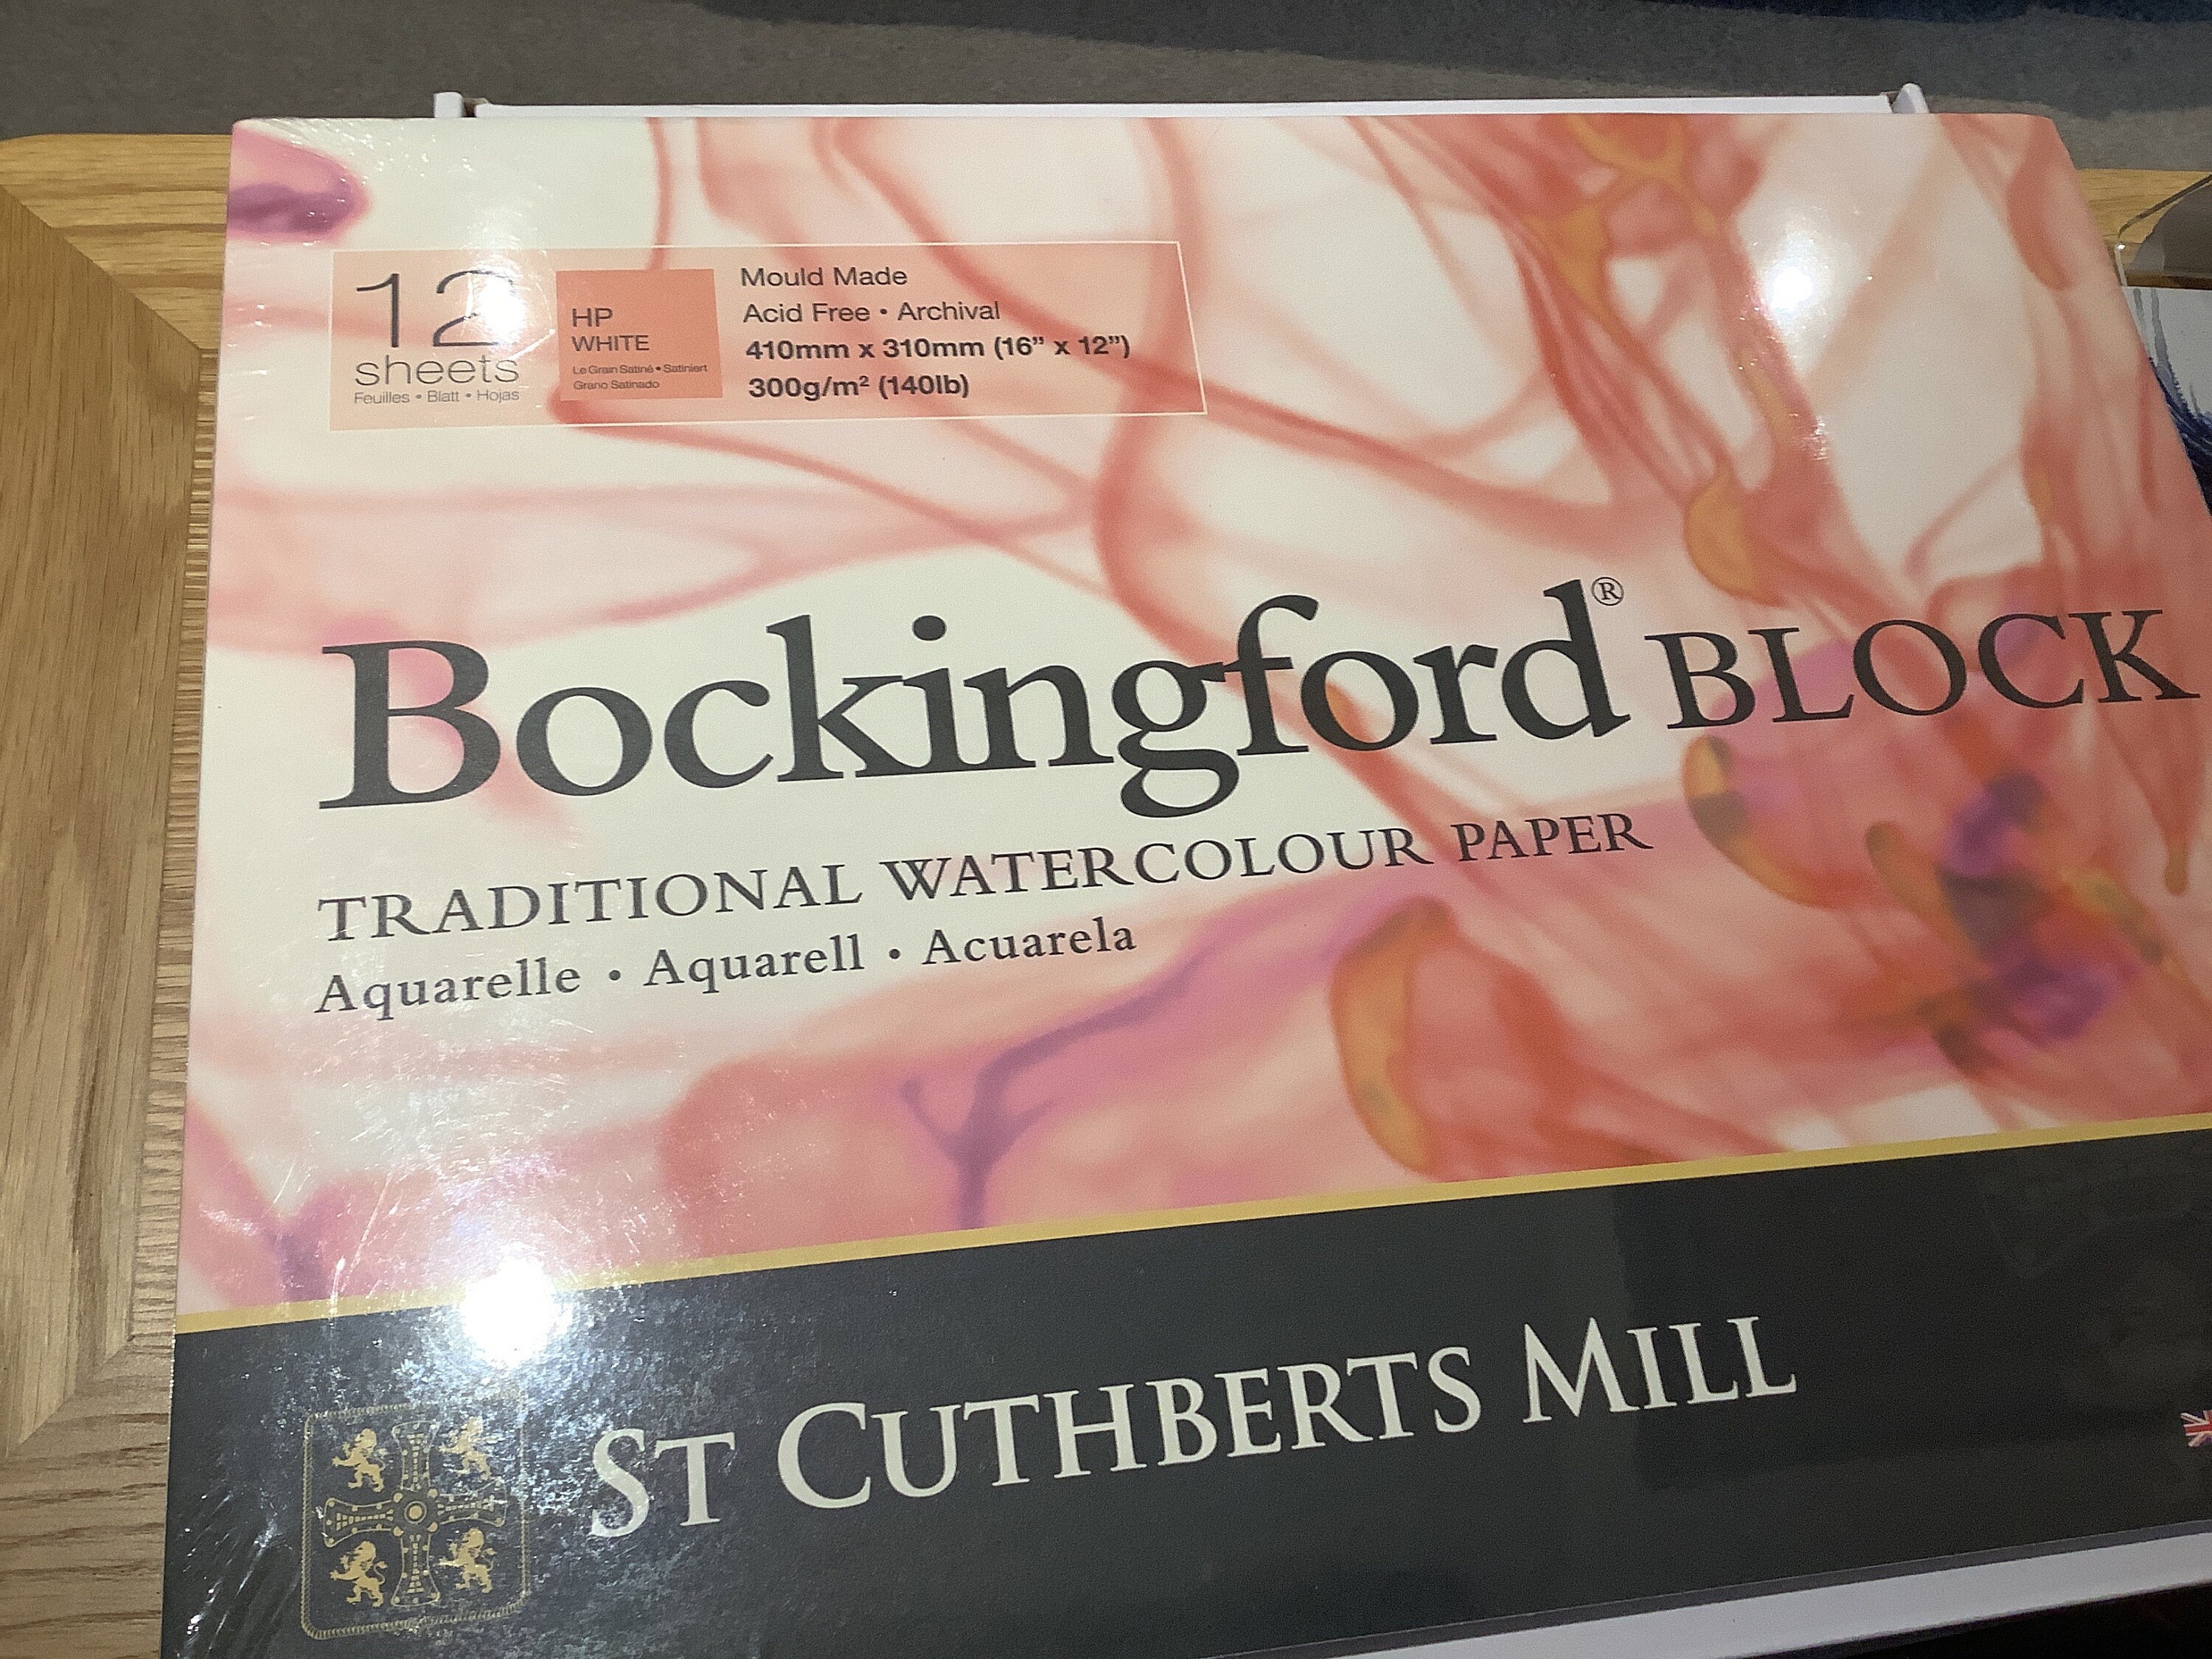 St Cuthberts Mill // Bockingford Watercolour Paper